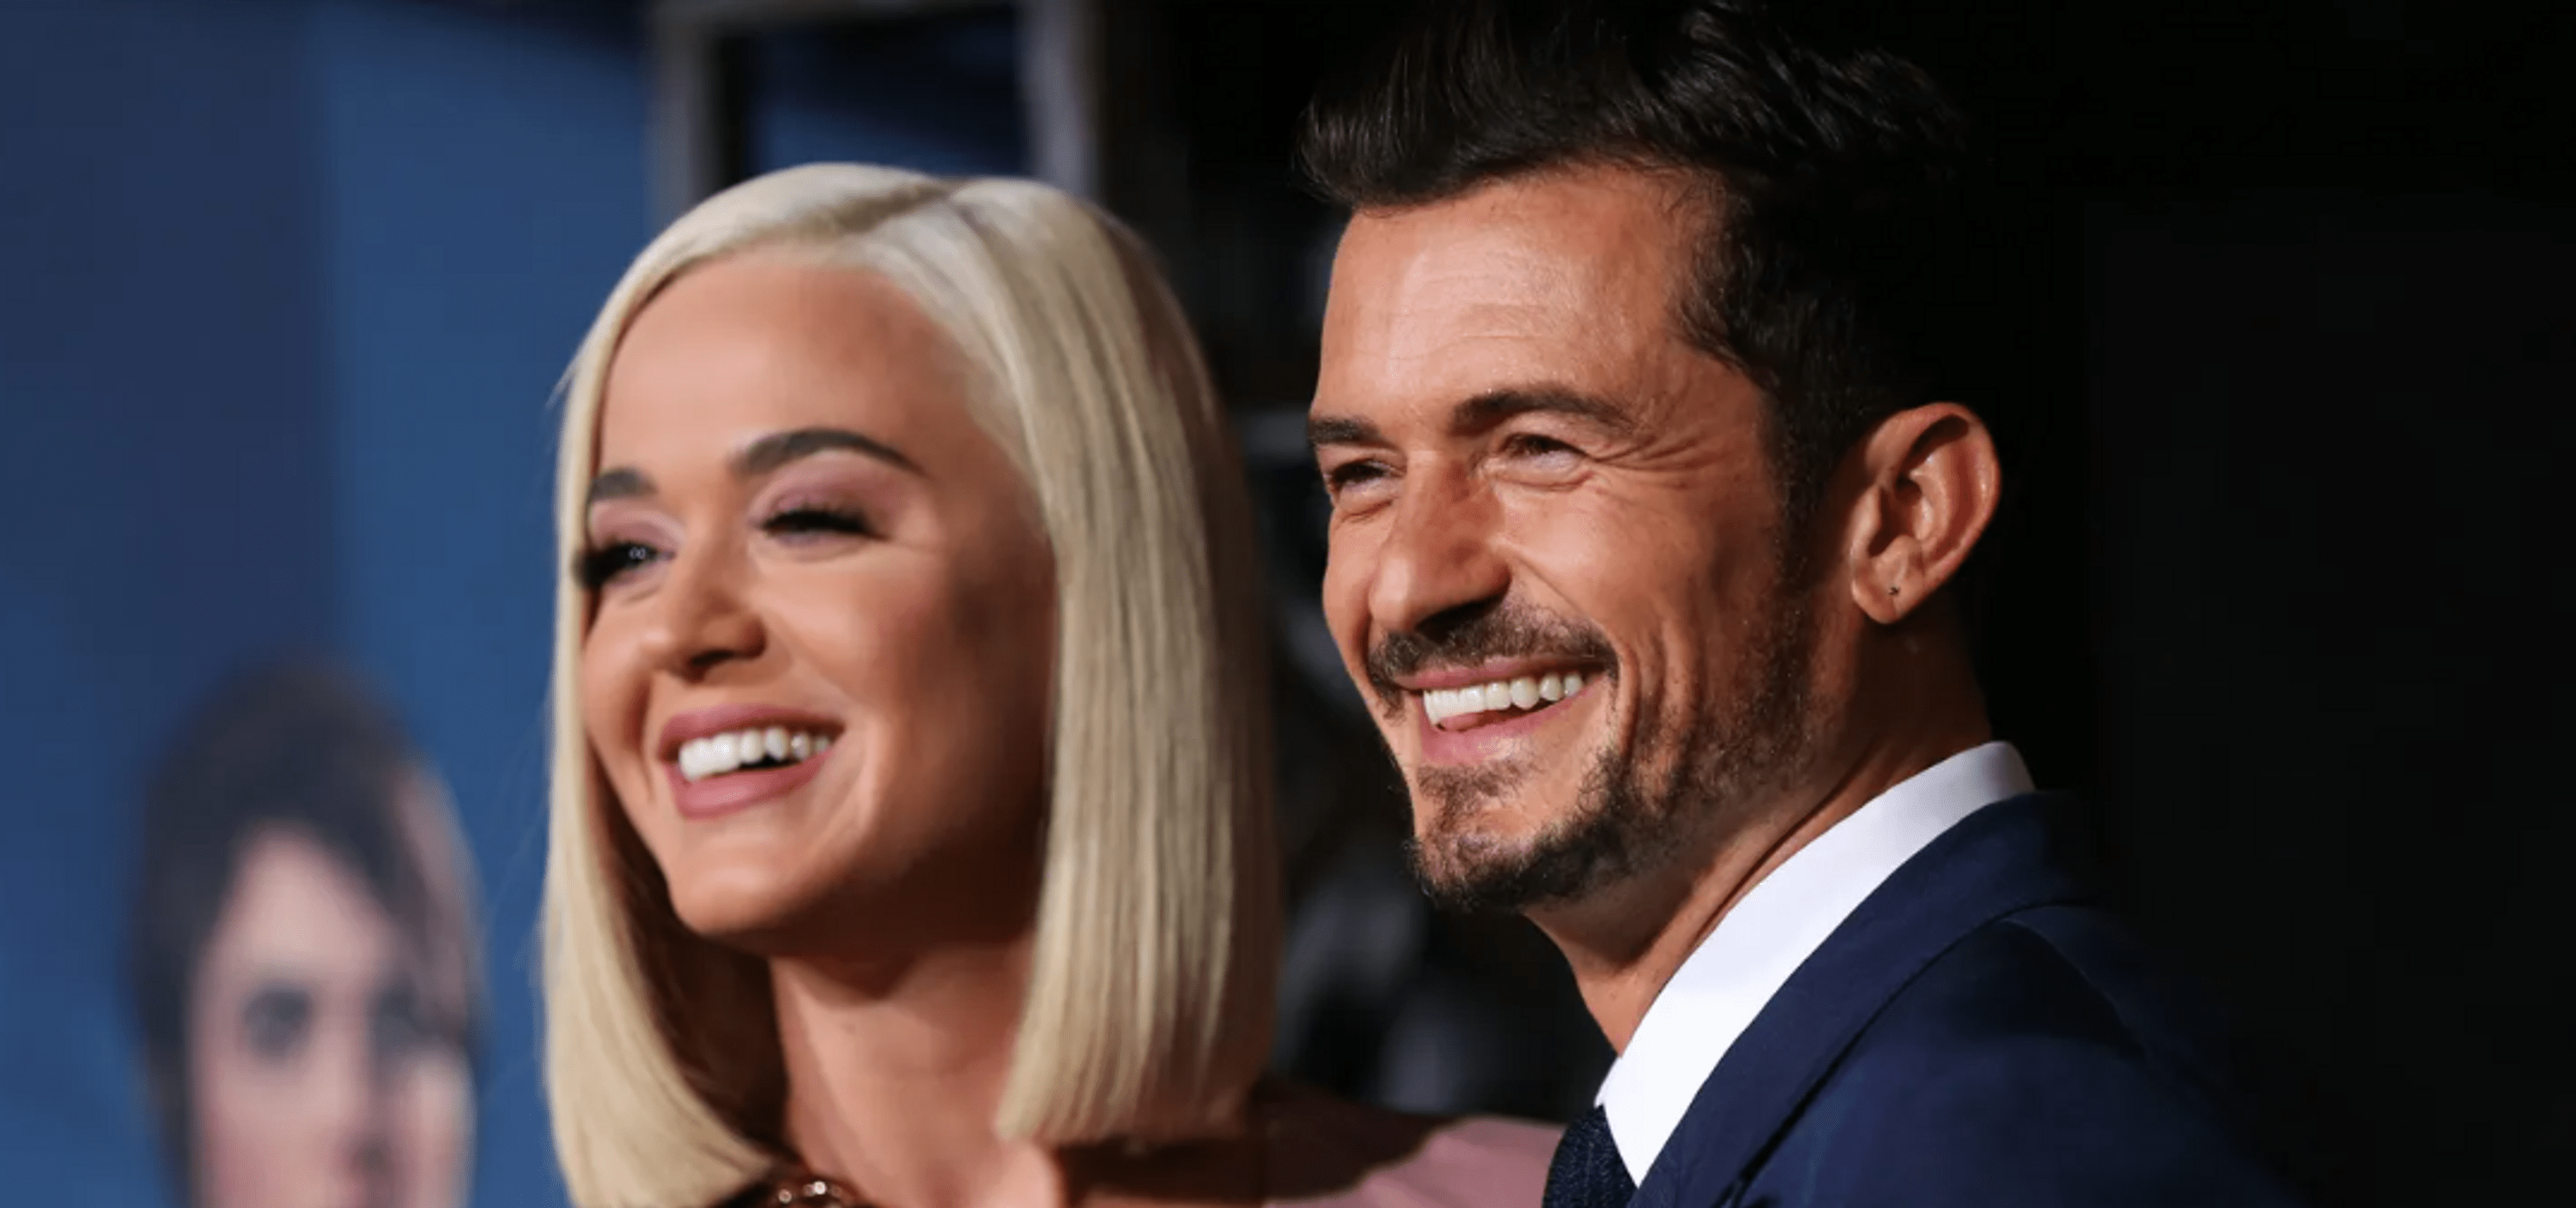 Katy Perry thanks Orlando Bloom for help in difficult times